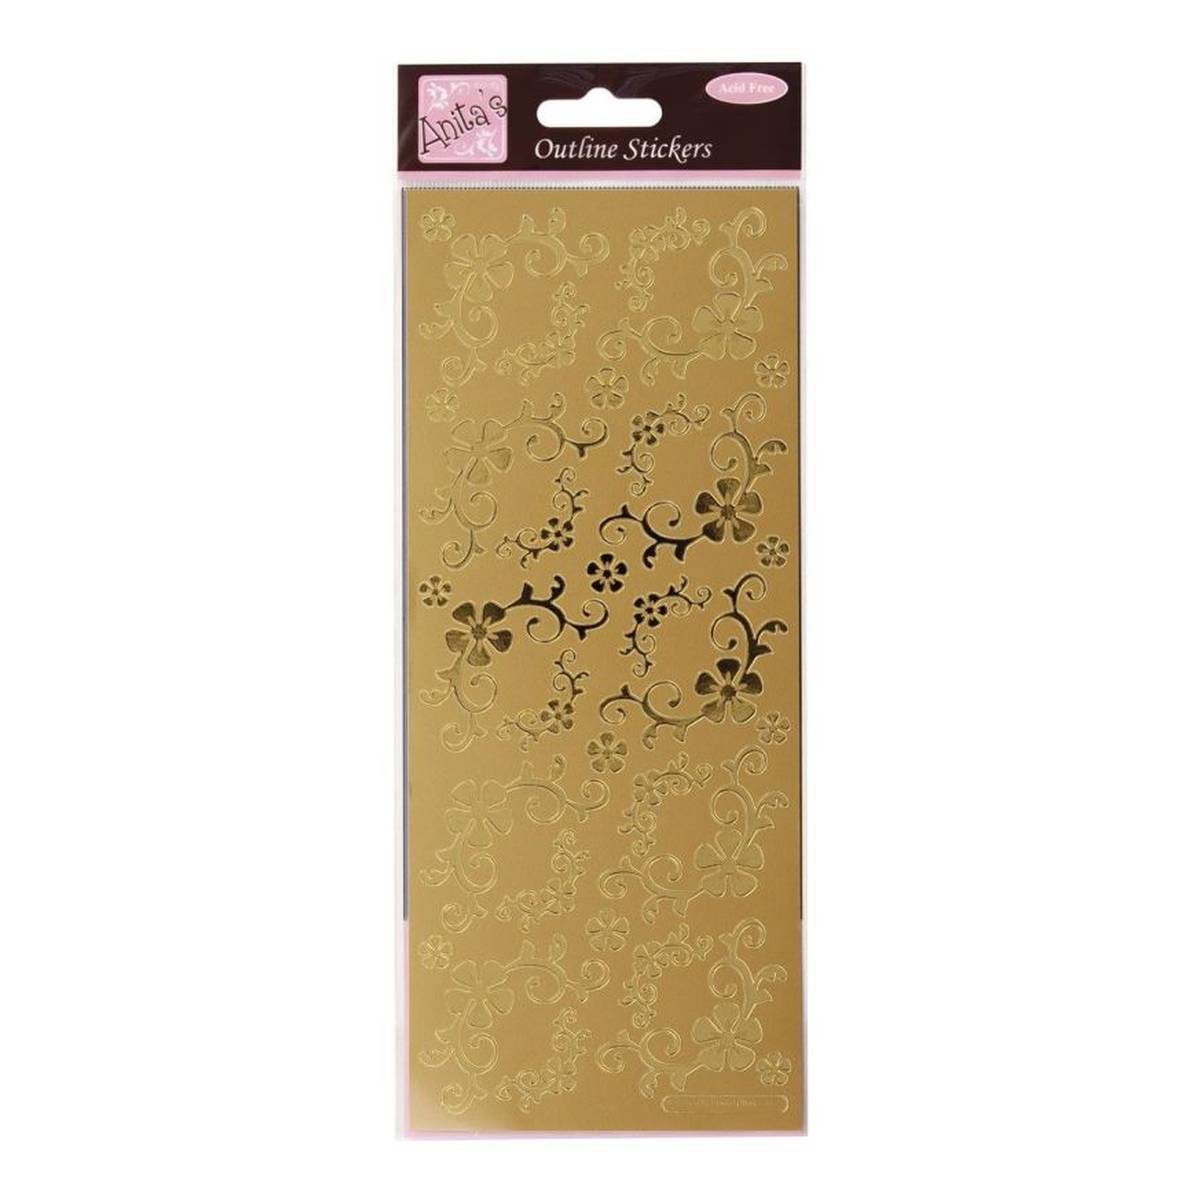 2X CRAFT STICKERS FOR SCRAPBOOKING NEW TRANPARANT GOLD CORNERS